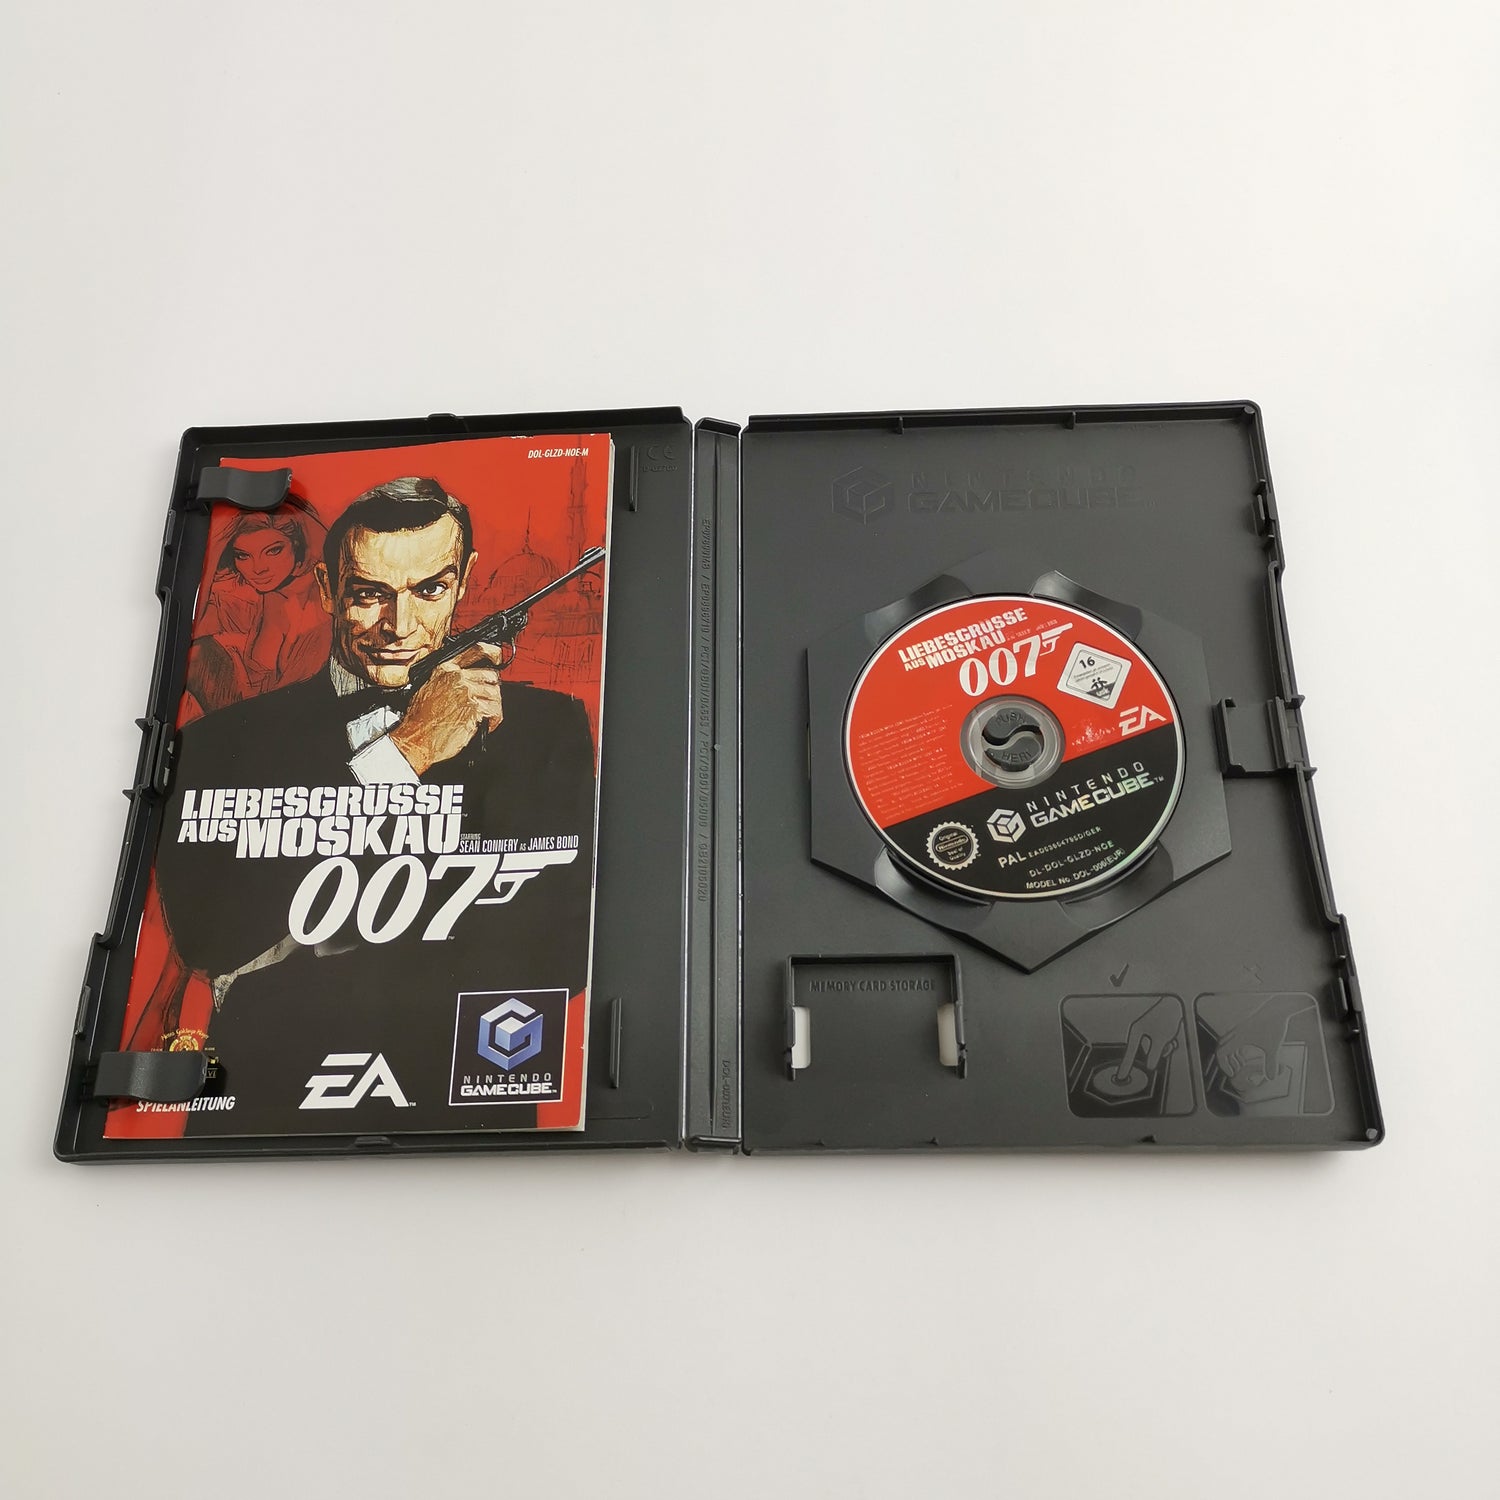 Nintendo Gamecube game: From Moscow with Love 007 - James Bond | German PAL OVP